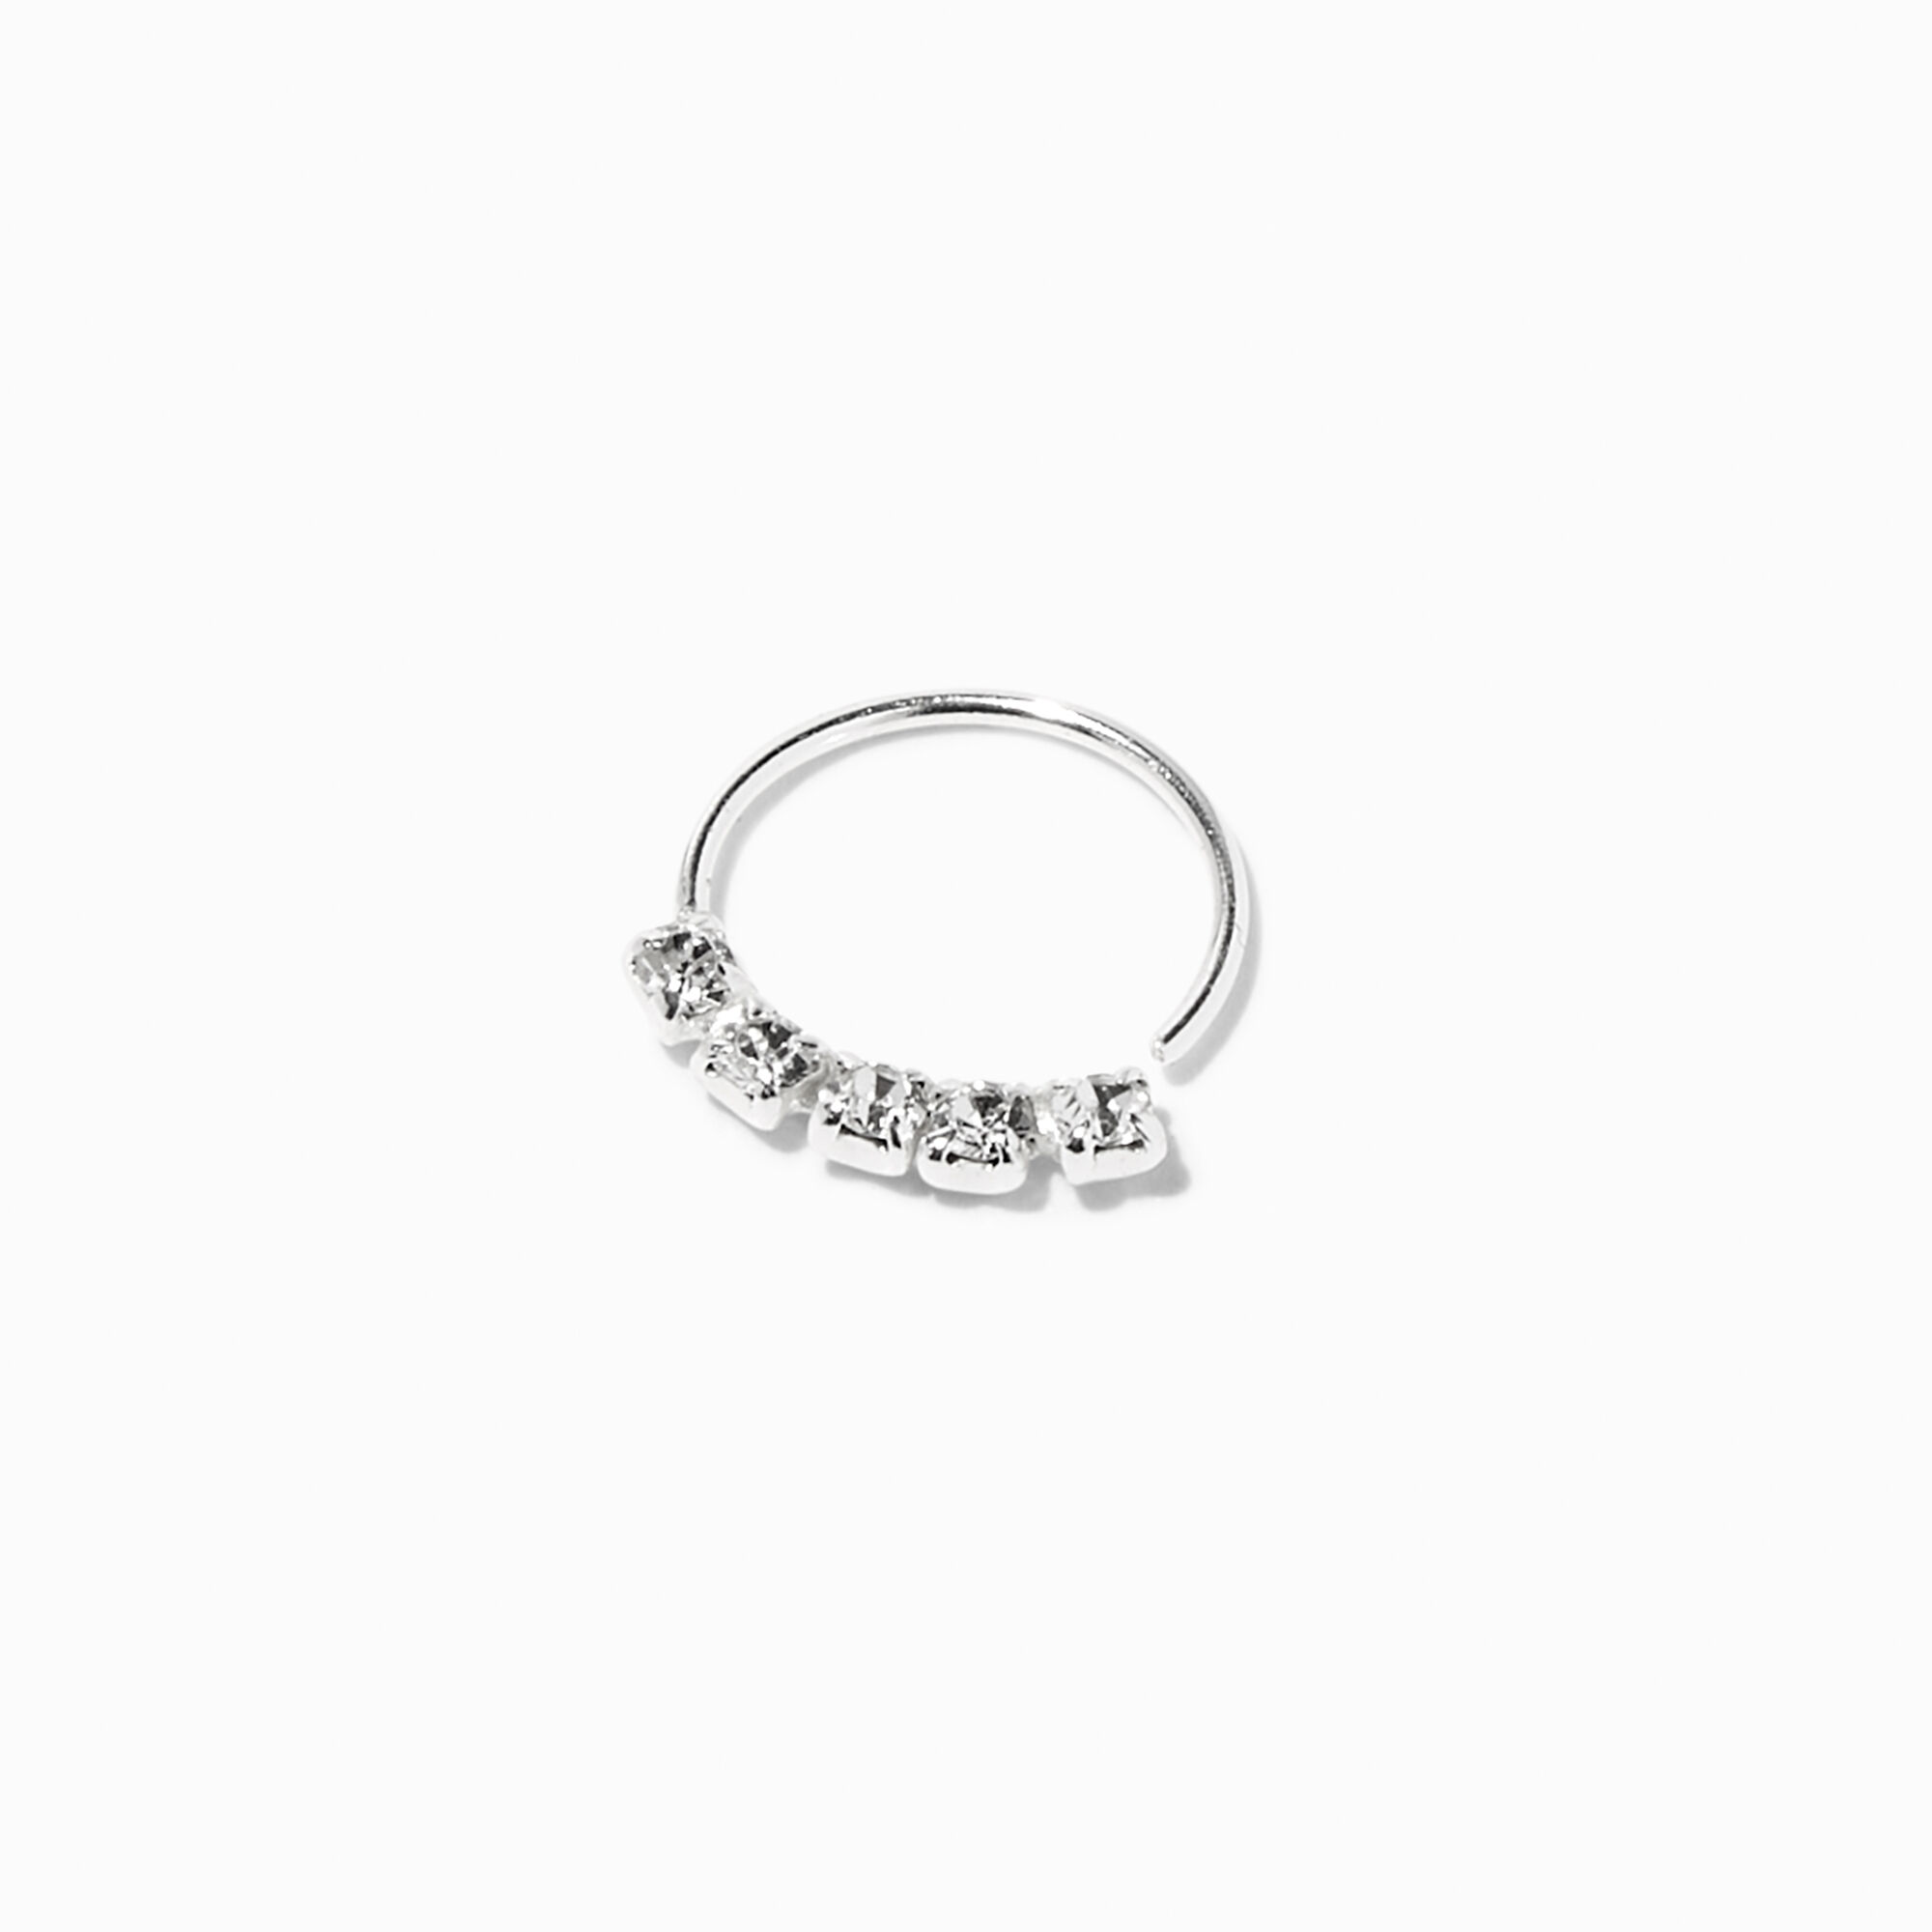 View Claires 22G Helix Crystal Hoop Earring Silver information